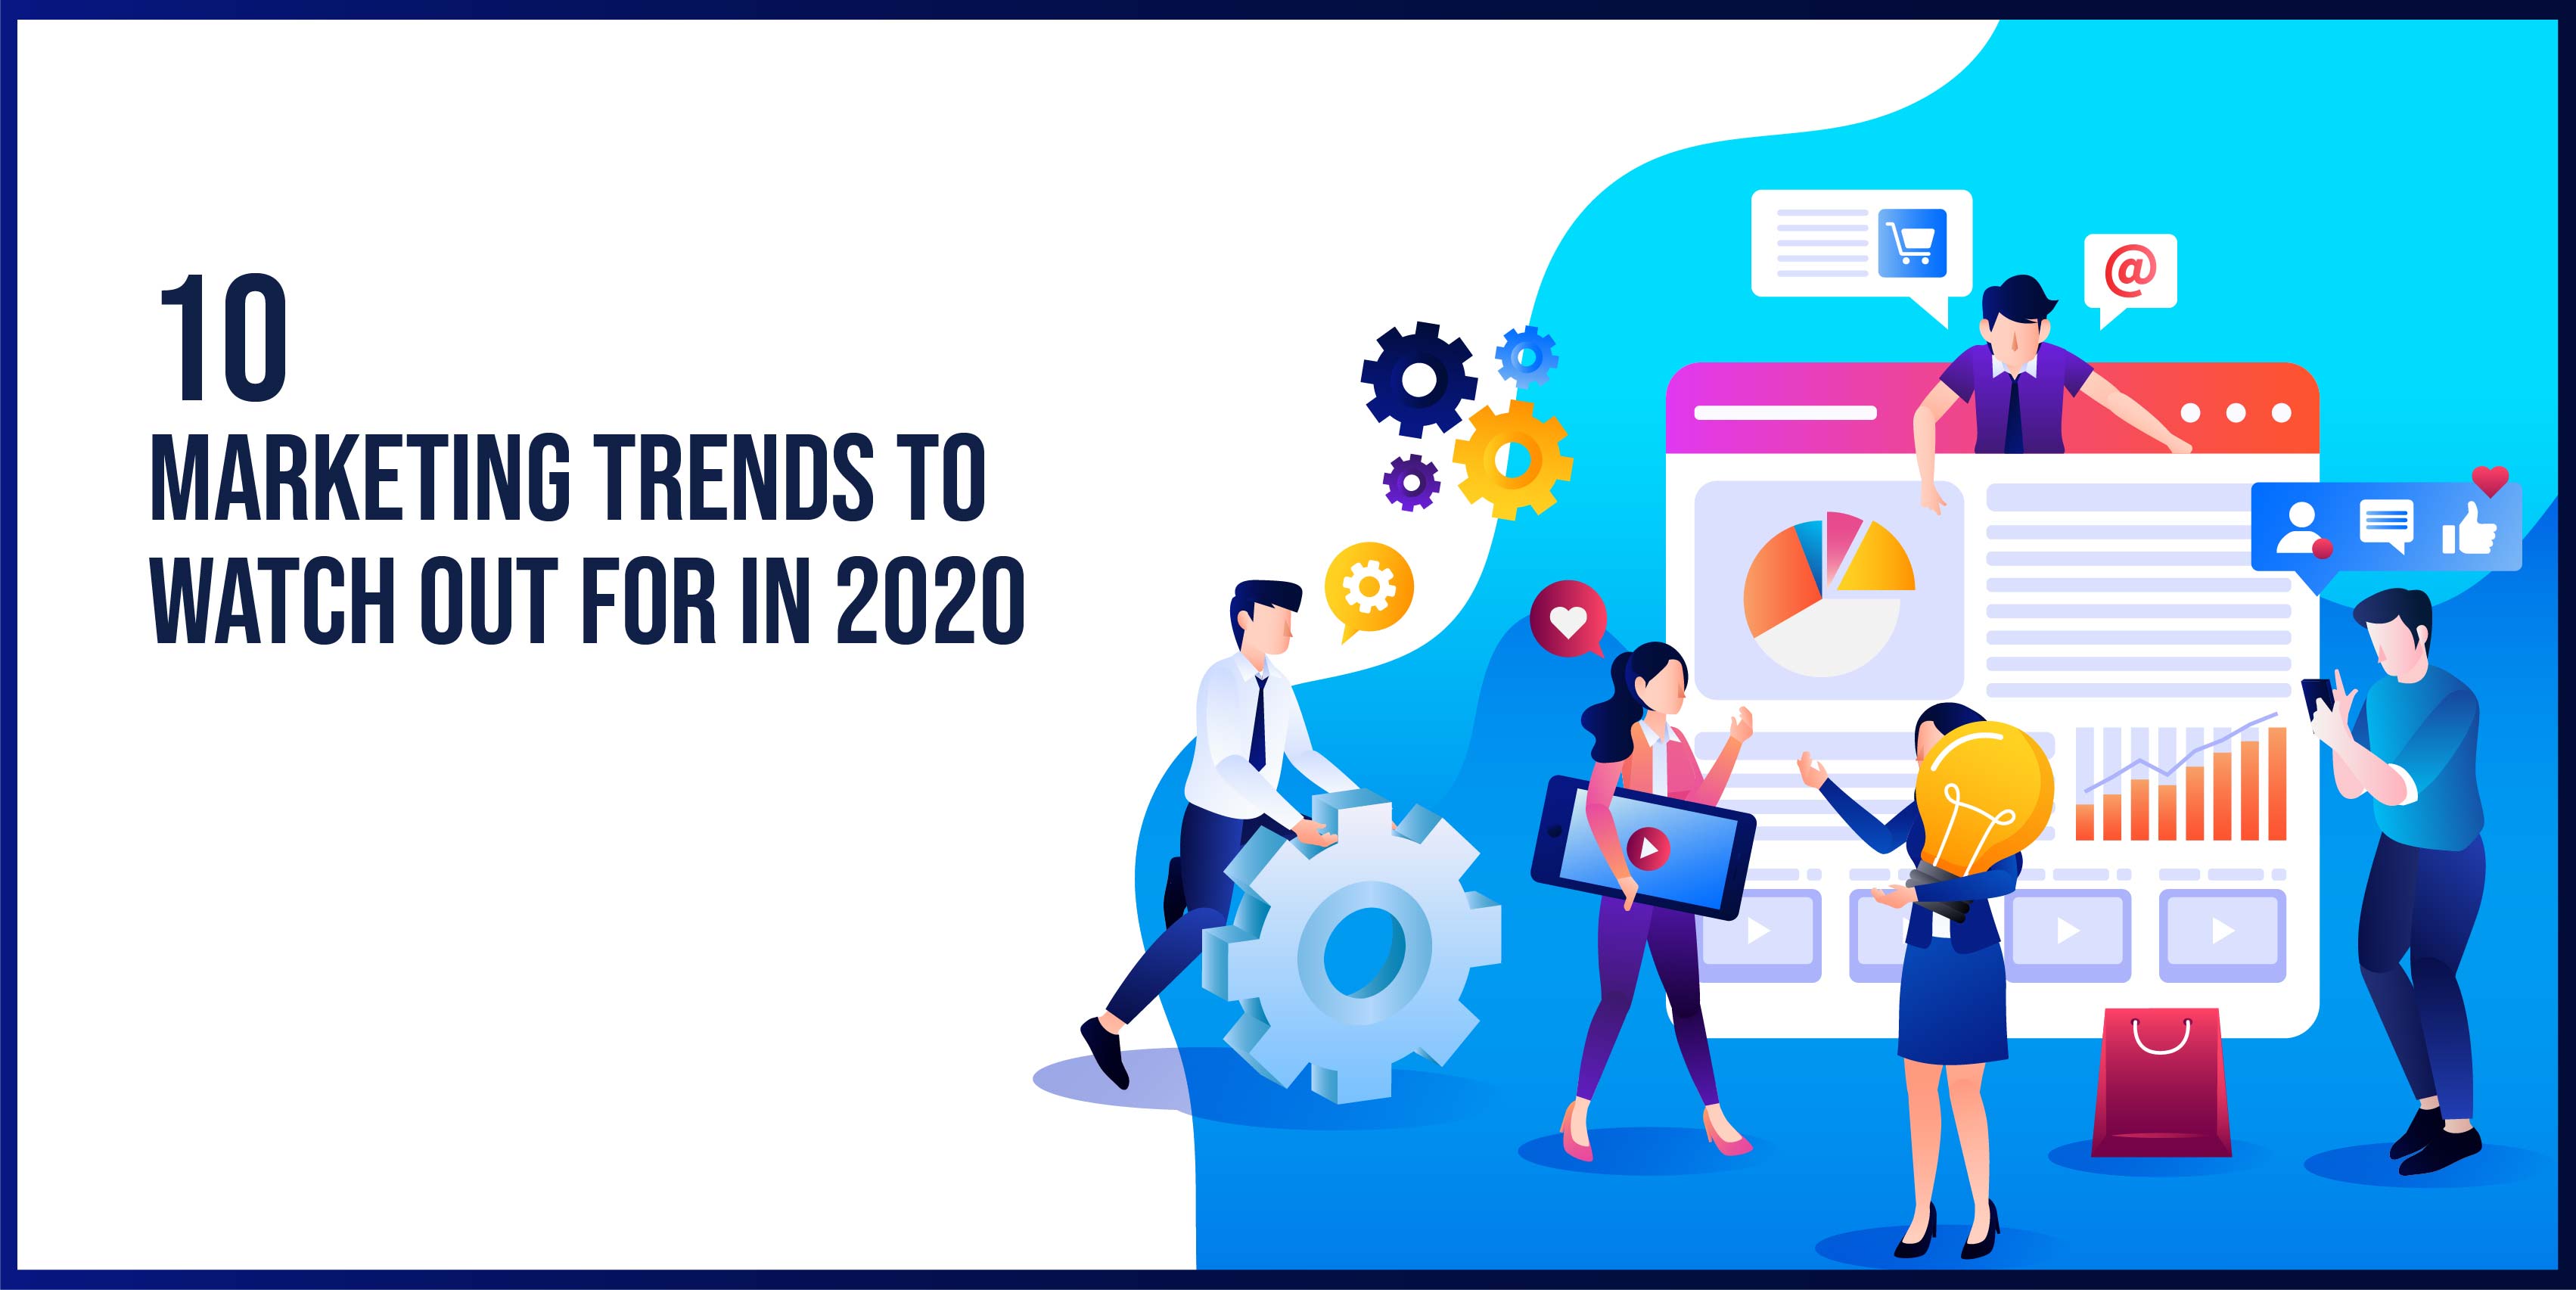 10 Marketing Trends to watch out for in 2020